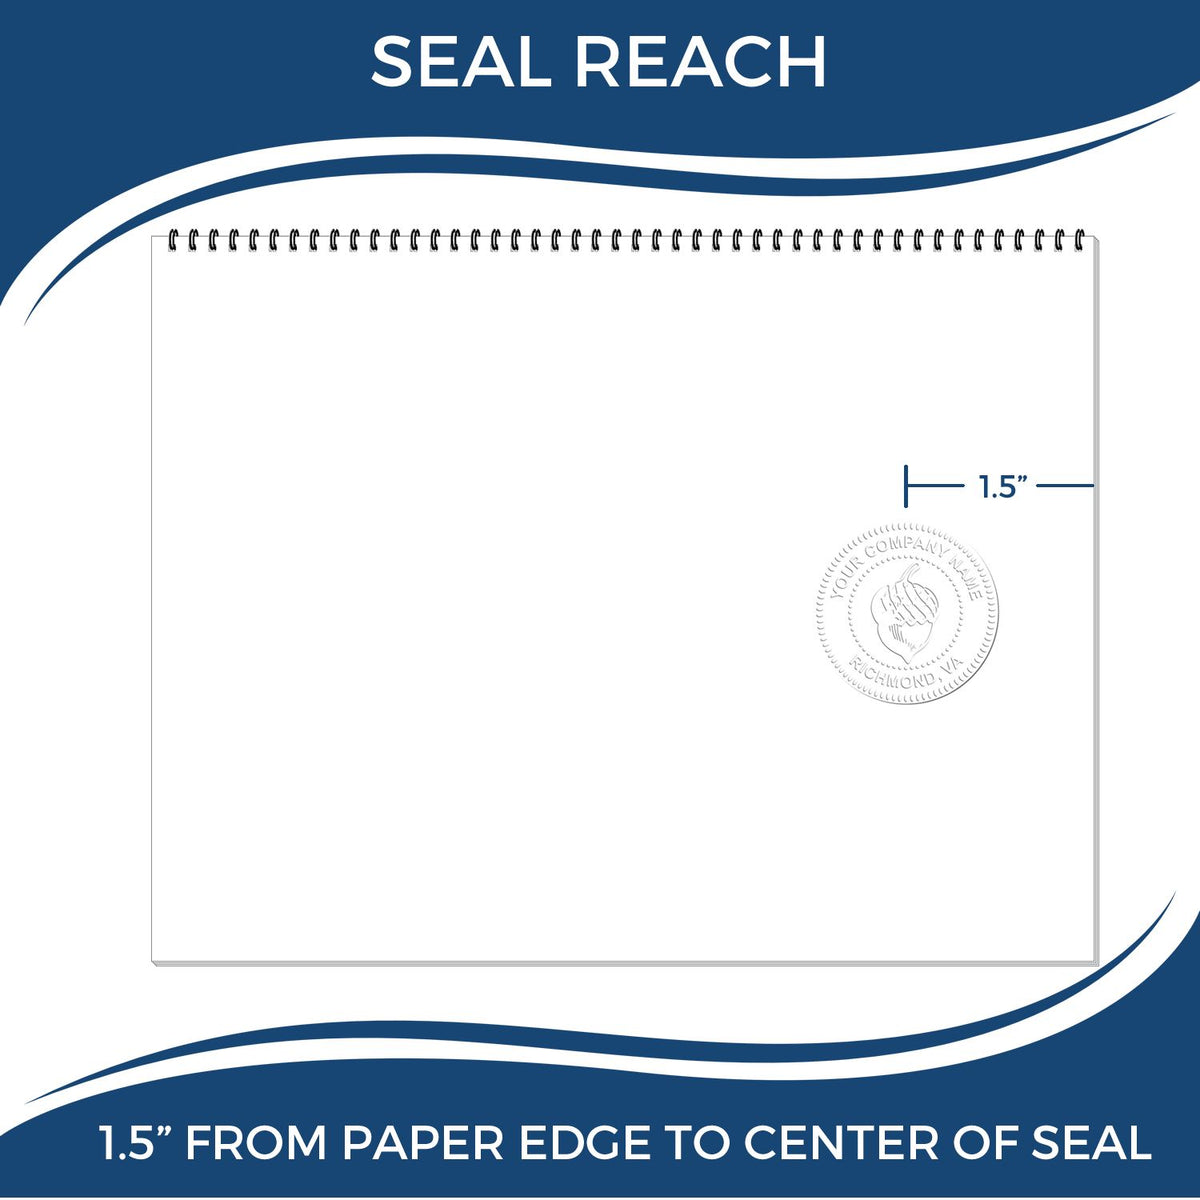 An infographic showing the seal reach which is represented by a ruler and a miniature seal image of the Gift Idaho Land Surveyor Seal